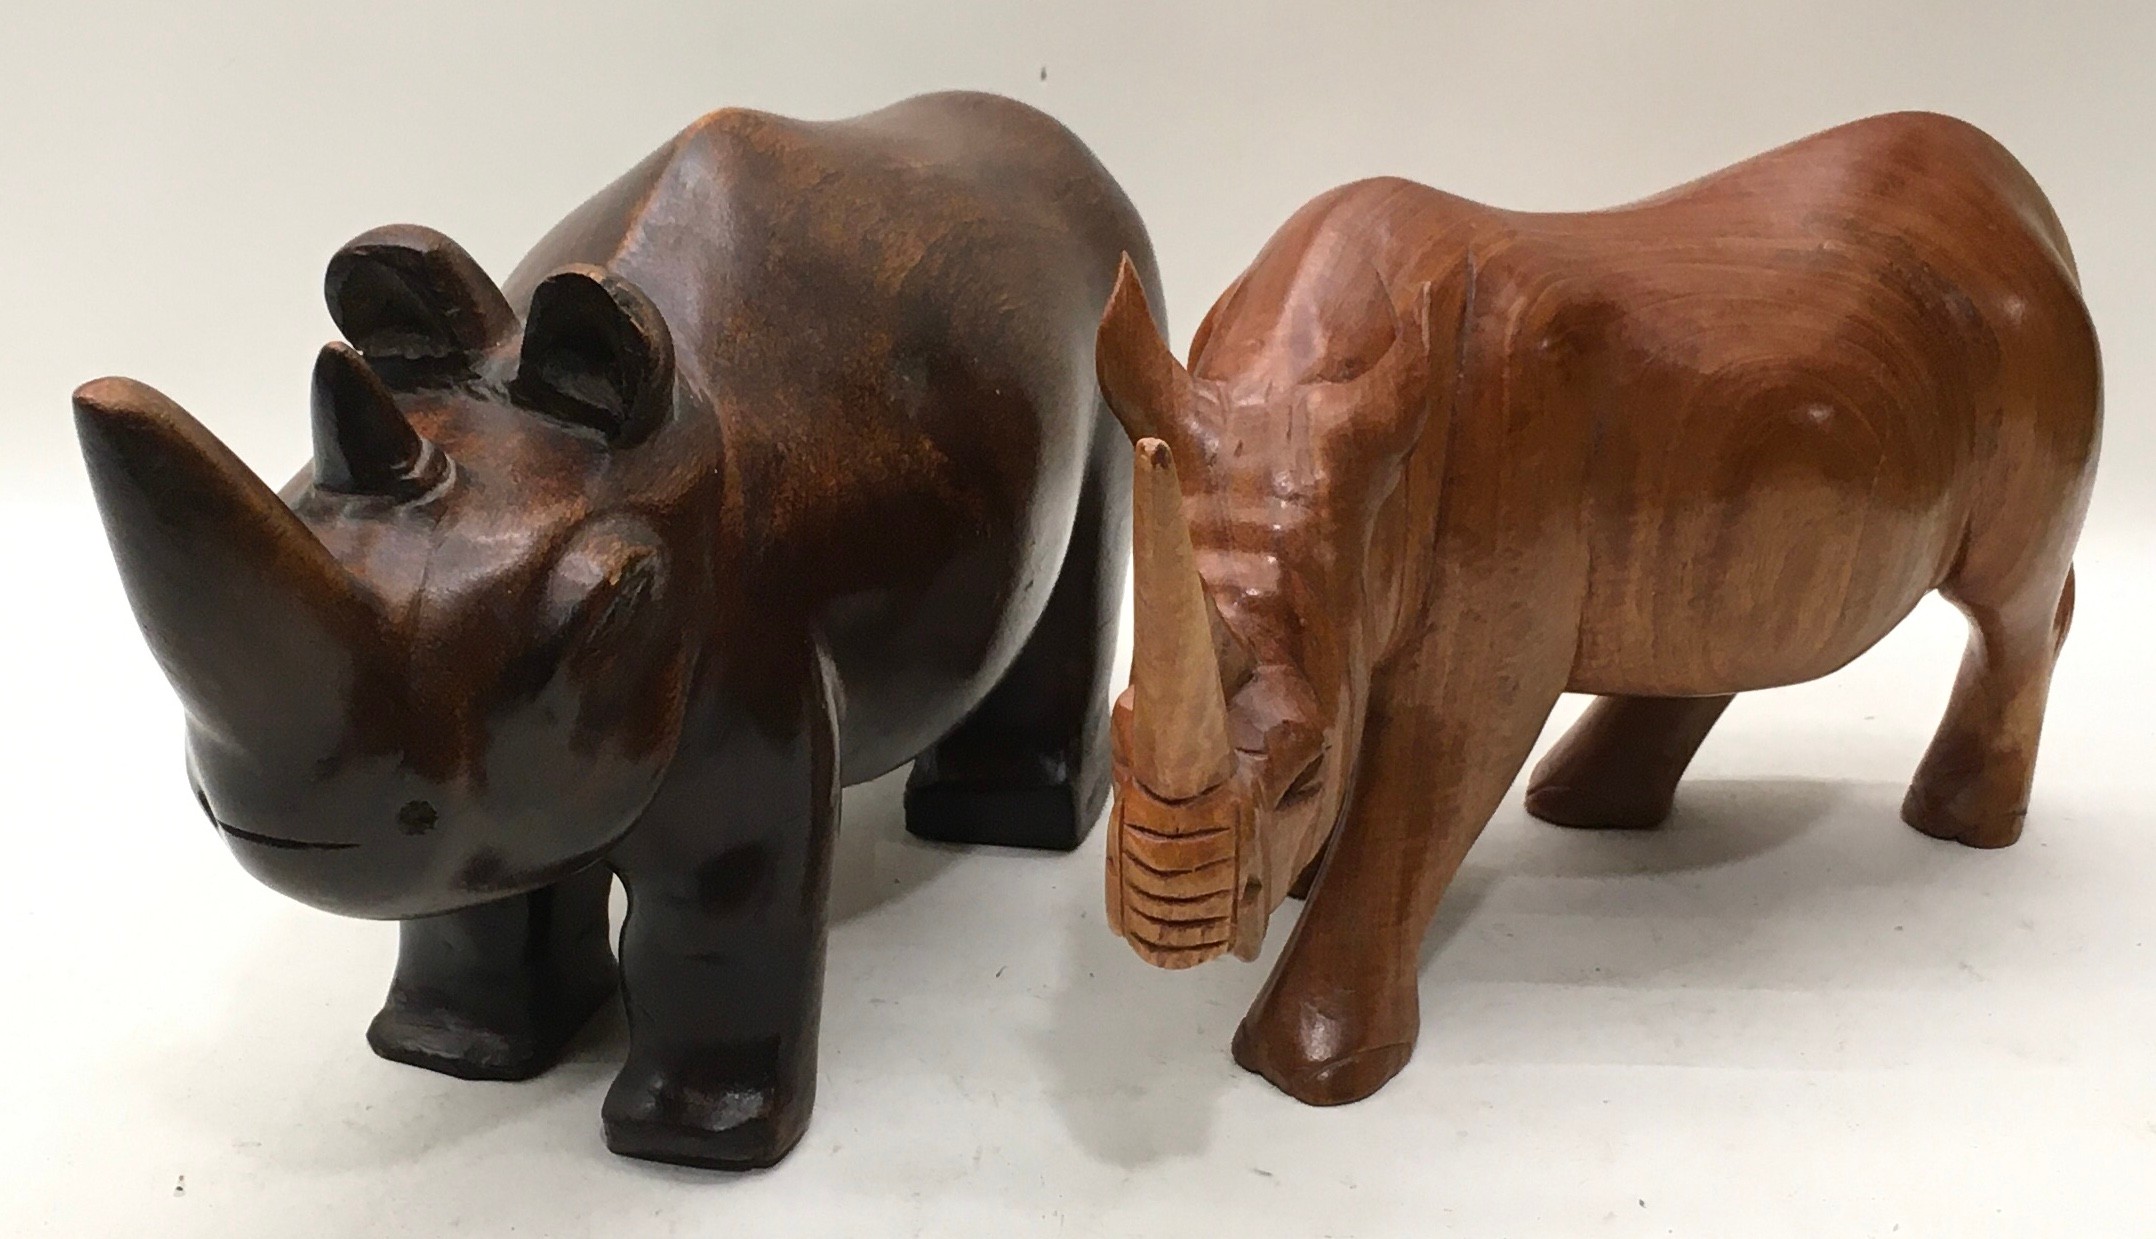 Pair of large solid wood carved rhinoceroses, the larger being 40cm across x 20cm tall - Image 2 of 3